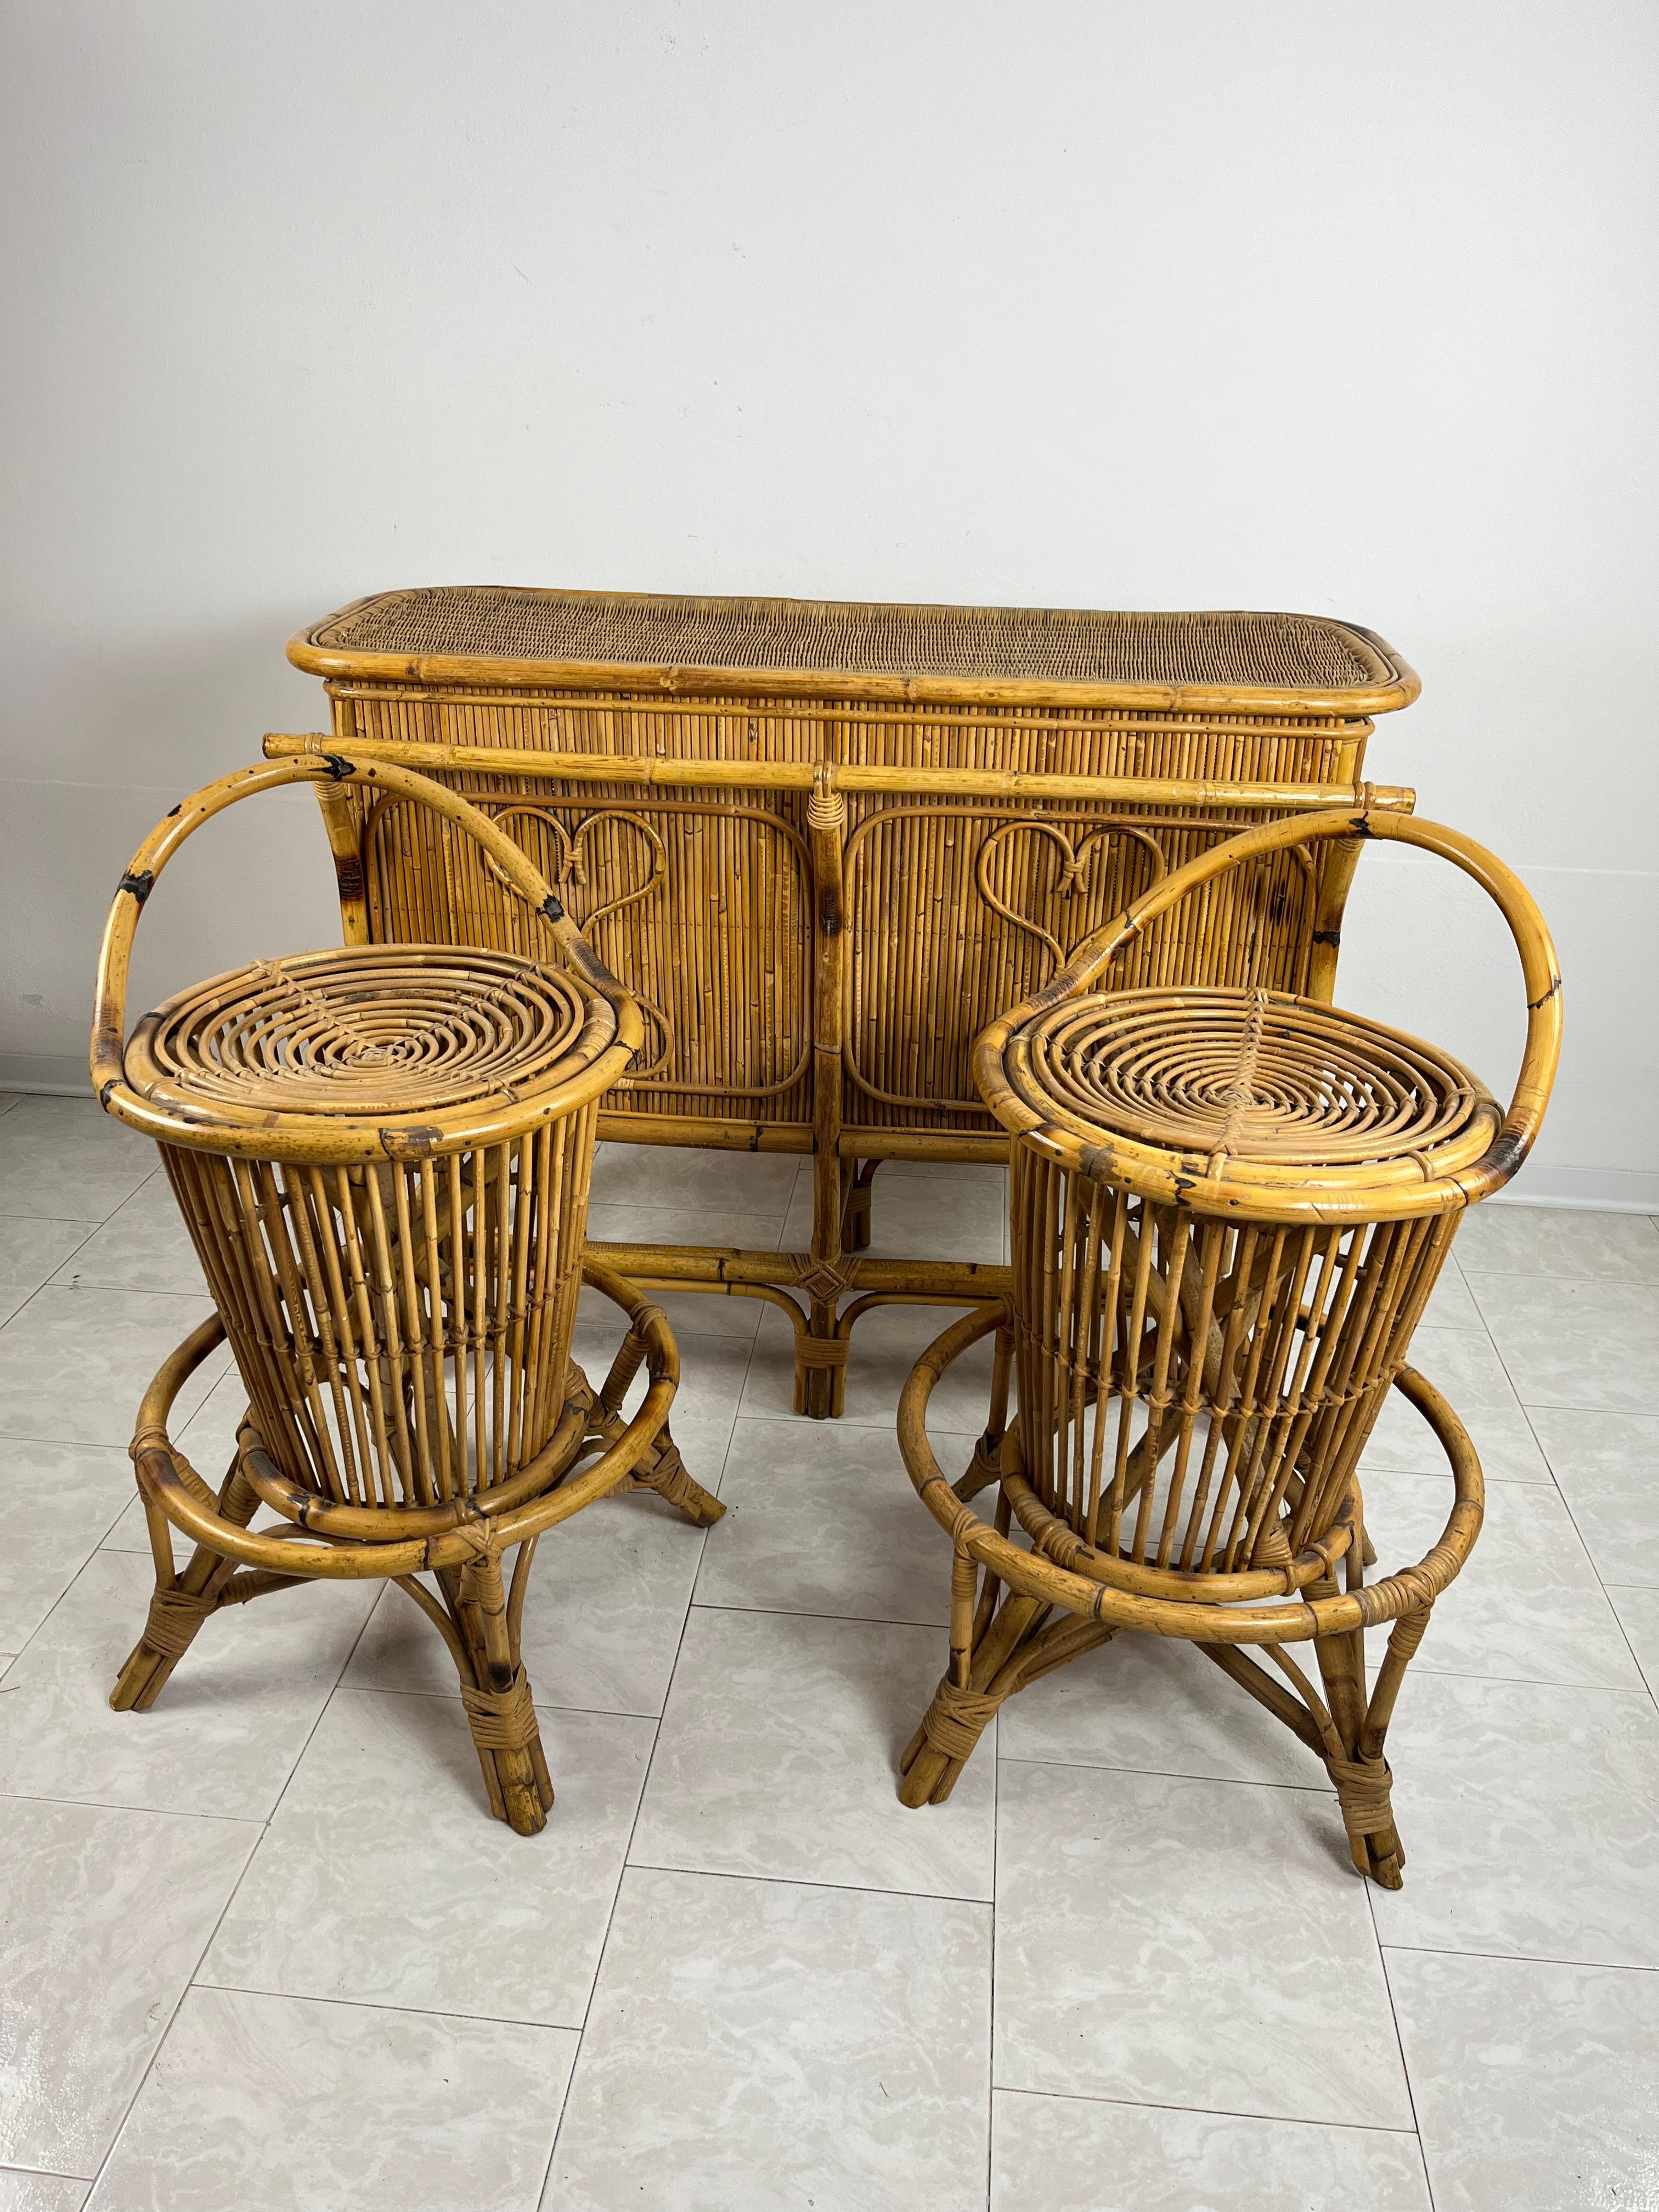 Bamboo and wicker bar cabinet with stools attributed to Tito Agnoli, 1950s, 3 pieces. The cabinet is equipped with two doors.
Excellent condition, small signs of aging.
The bar cabinet measures 126 cm wide, 53 cm deep and 94 cm high. The two stools